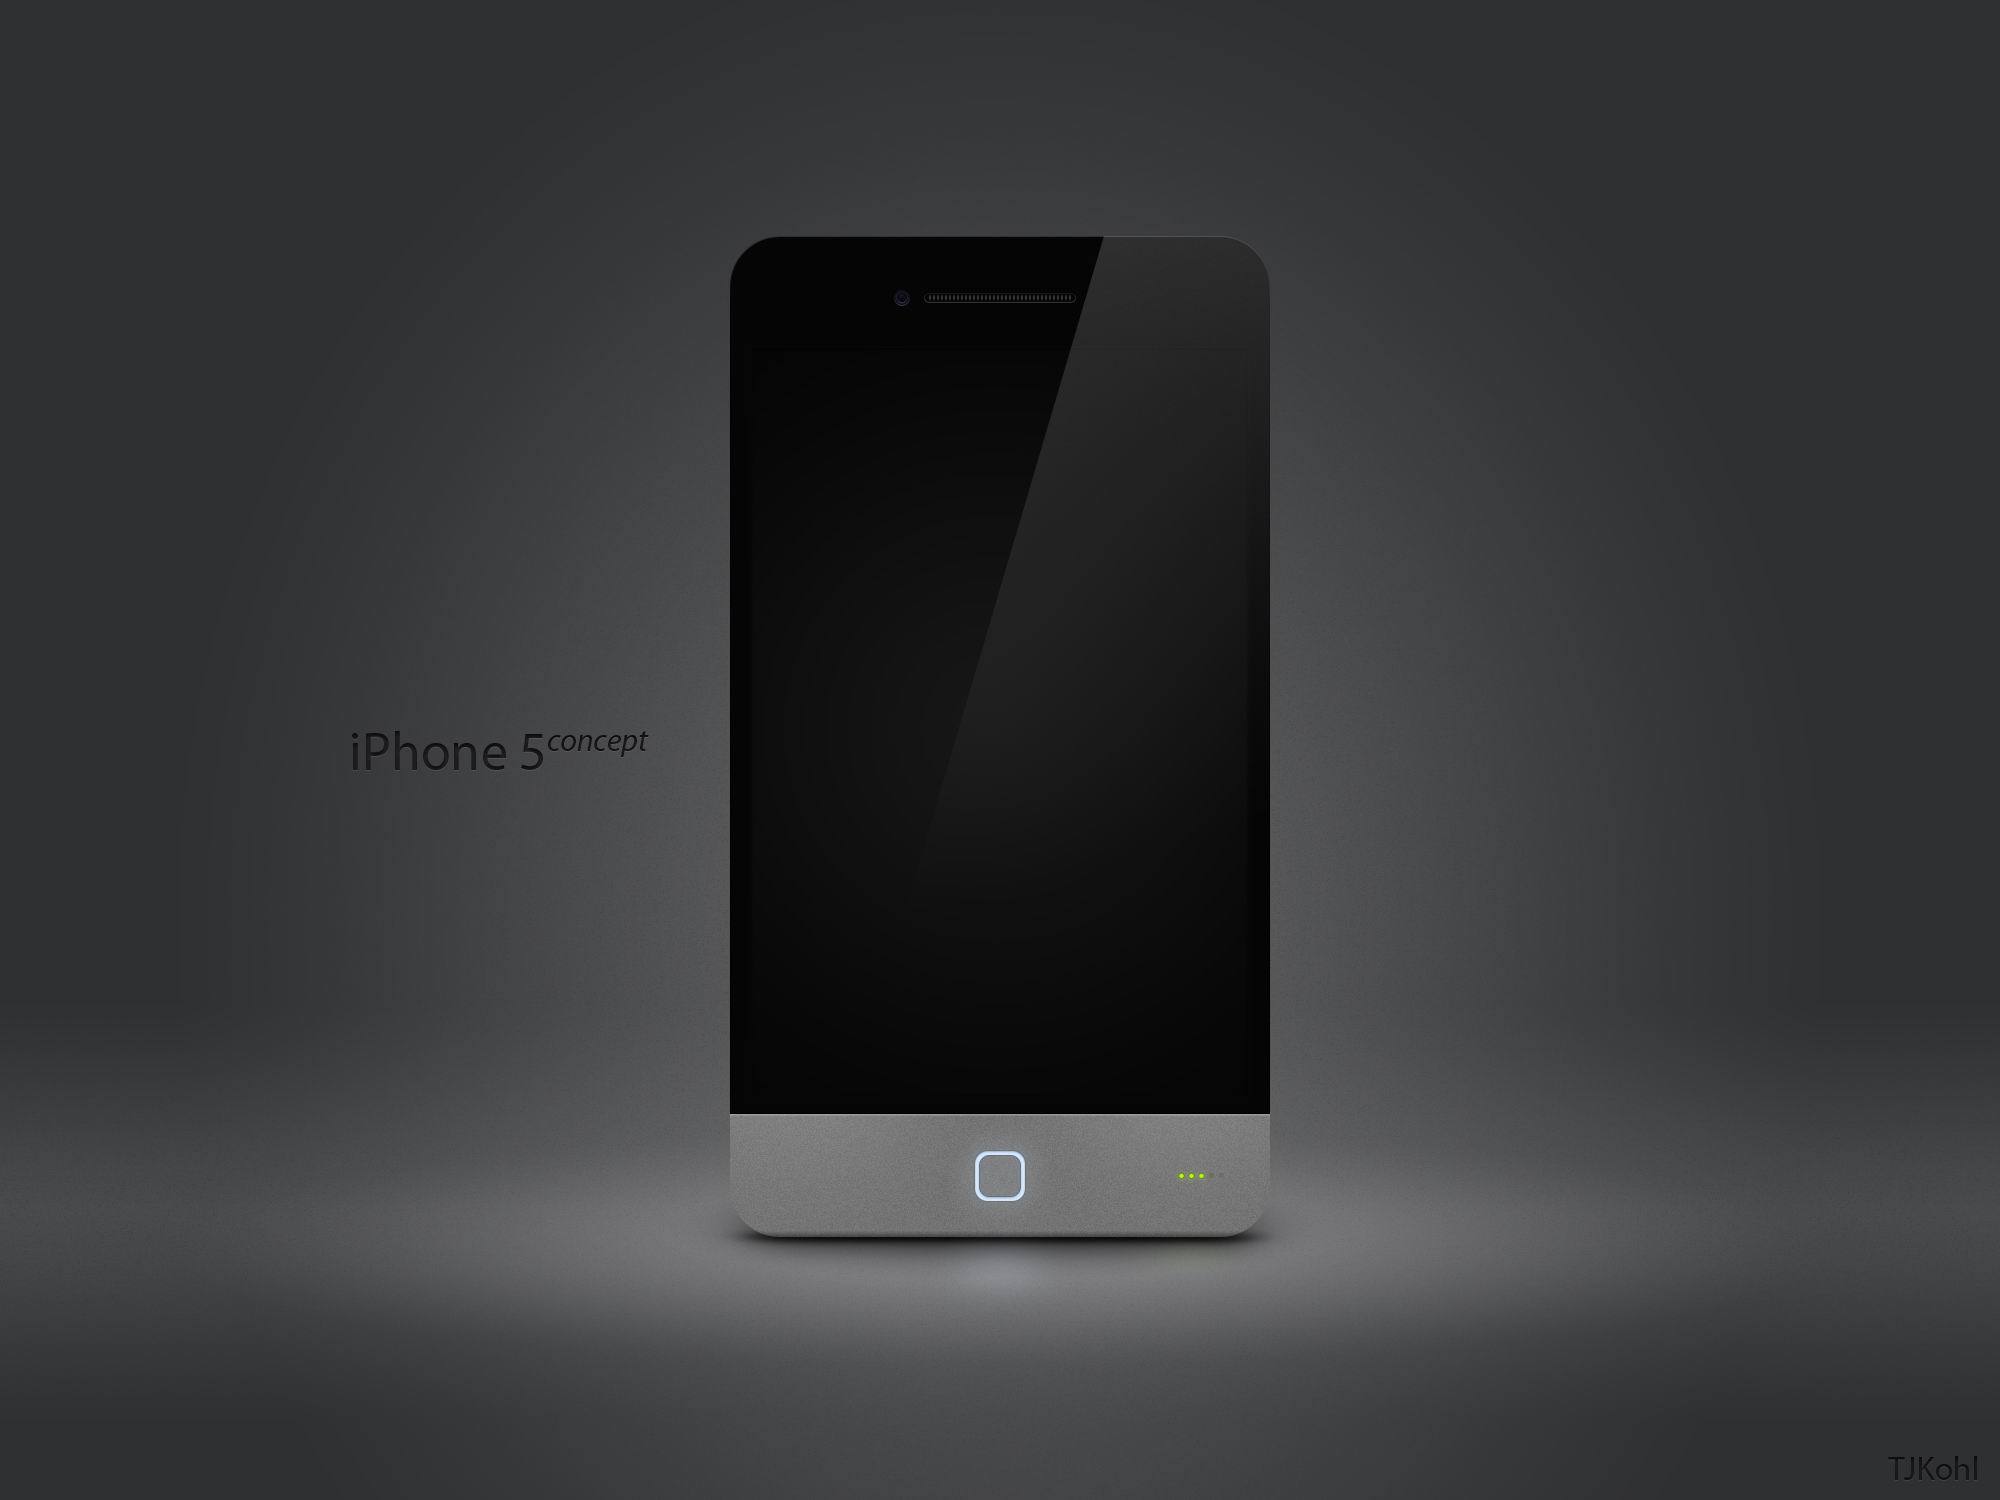 iPhone 5s Concept Wallpaper And Image Pictures Photos